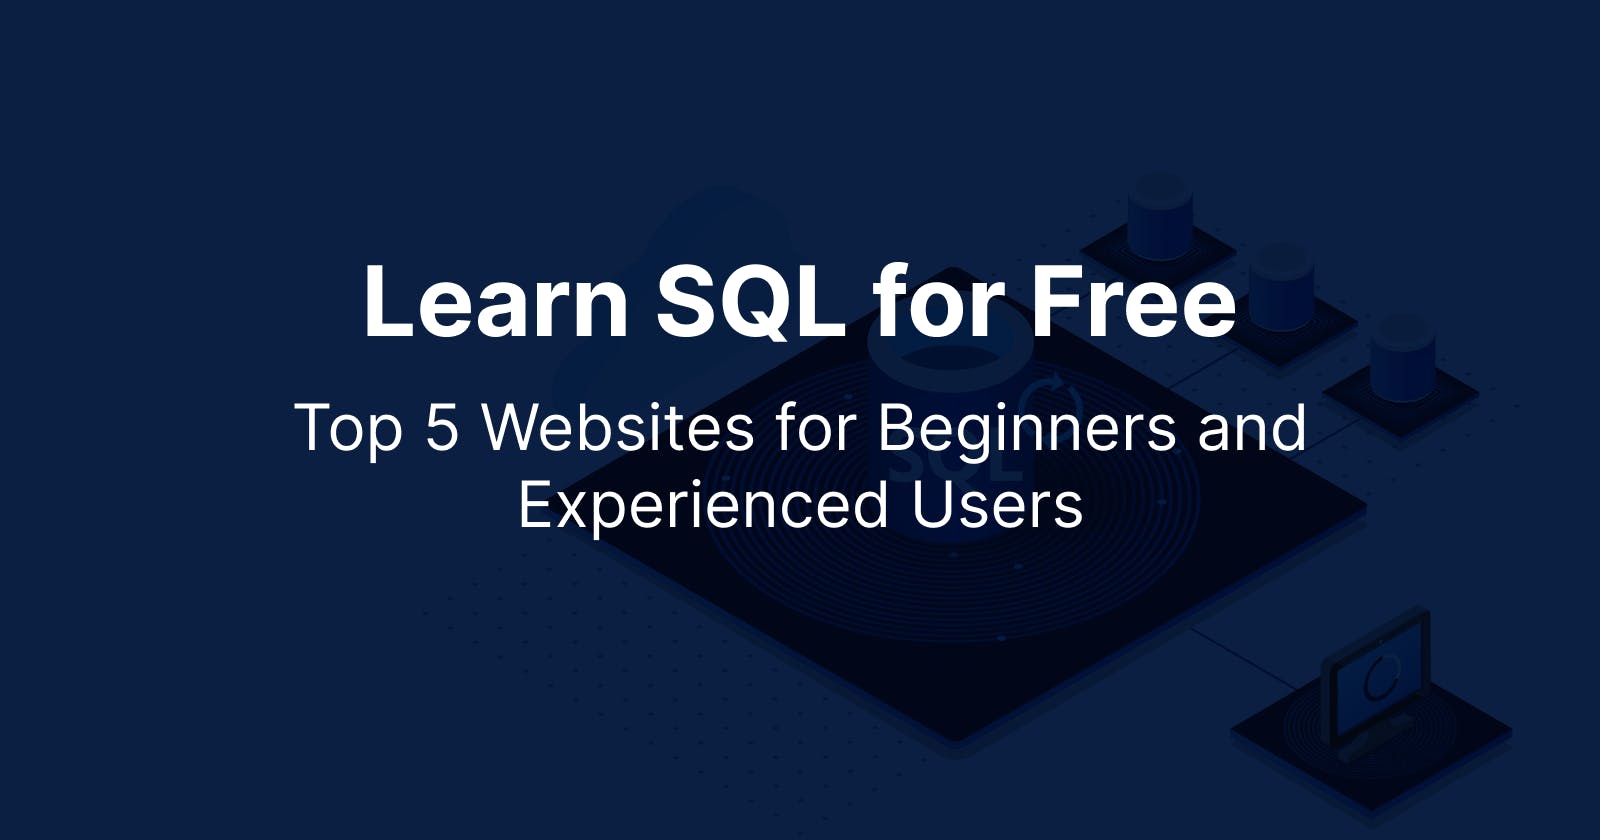 Learn SQL for Free: Top 5 Websites for Beginners and Experienced Users